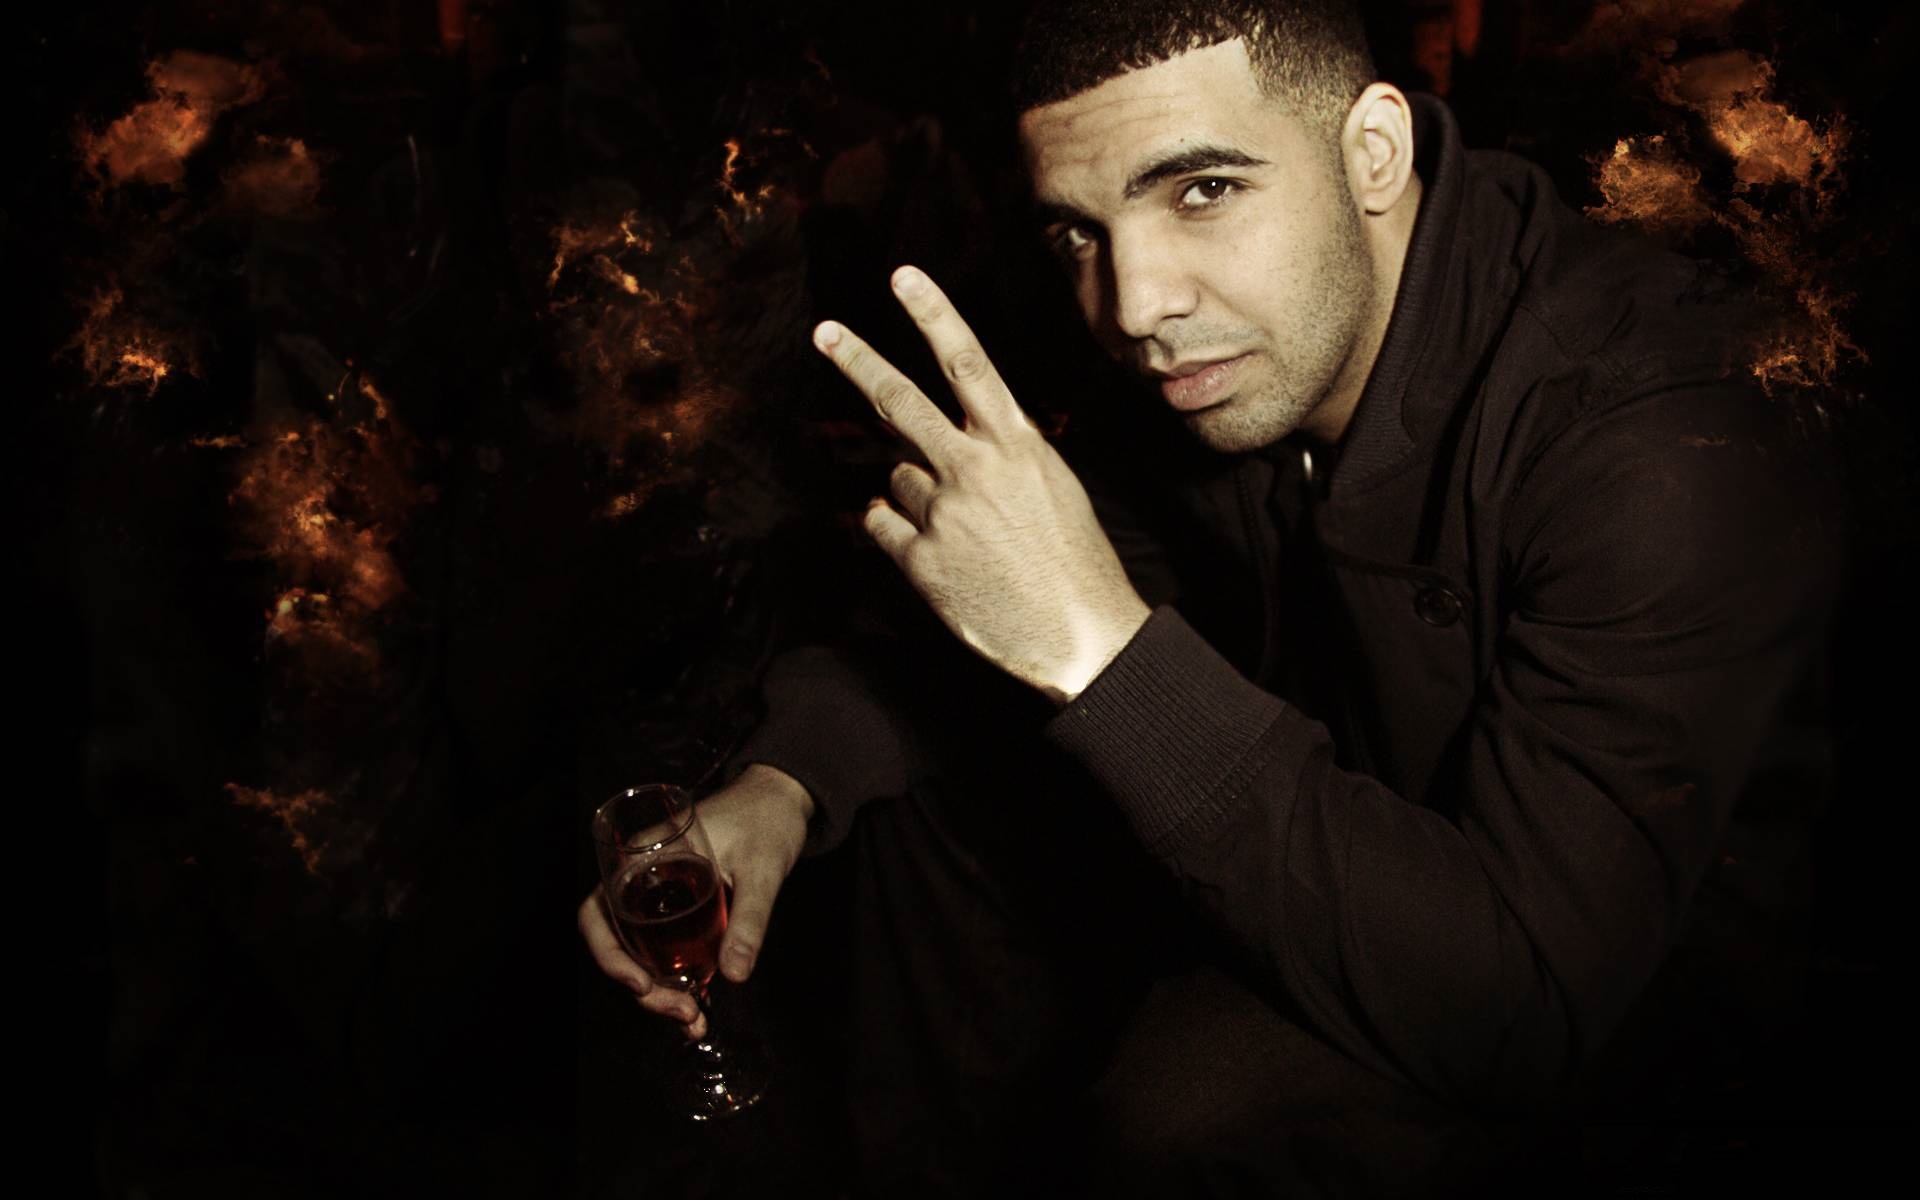 Drake Wallpapers Hd Pictures - Drake Doing Peace Sign - 1920x1200 Wallpaper  